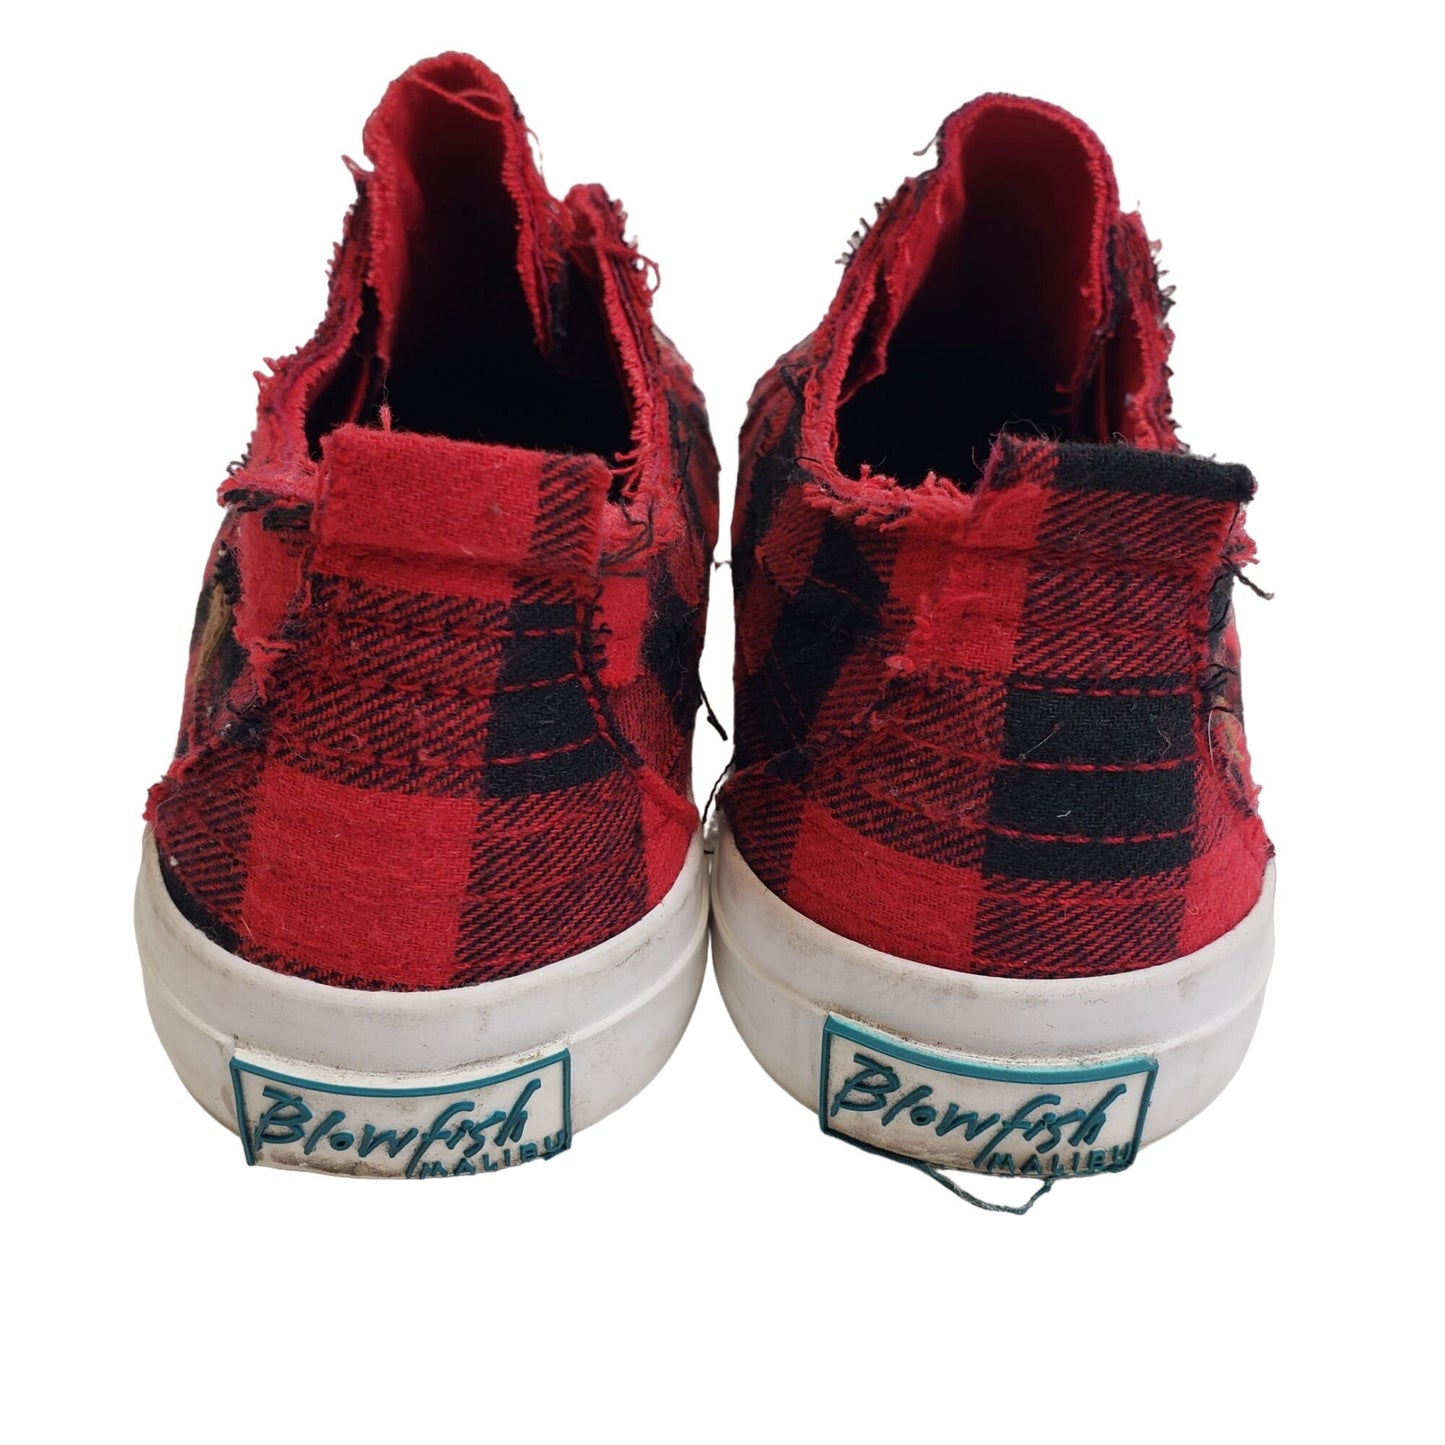 Blowfish Plaid Distressed Sneakers Size 6.5